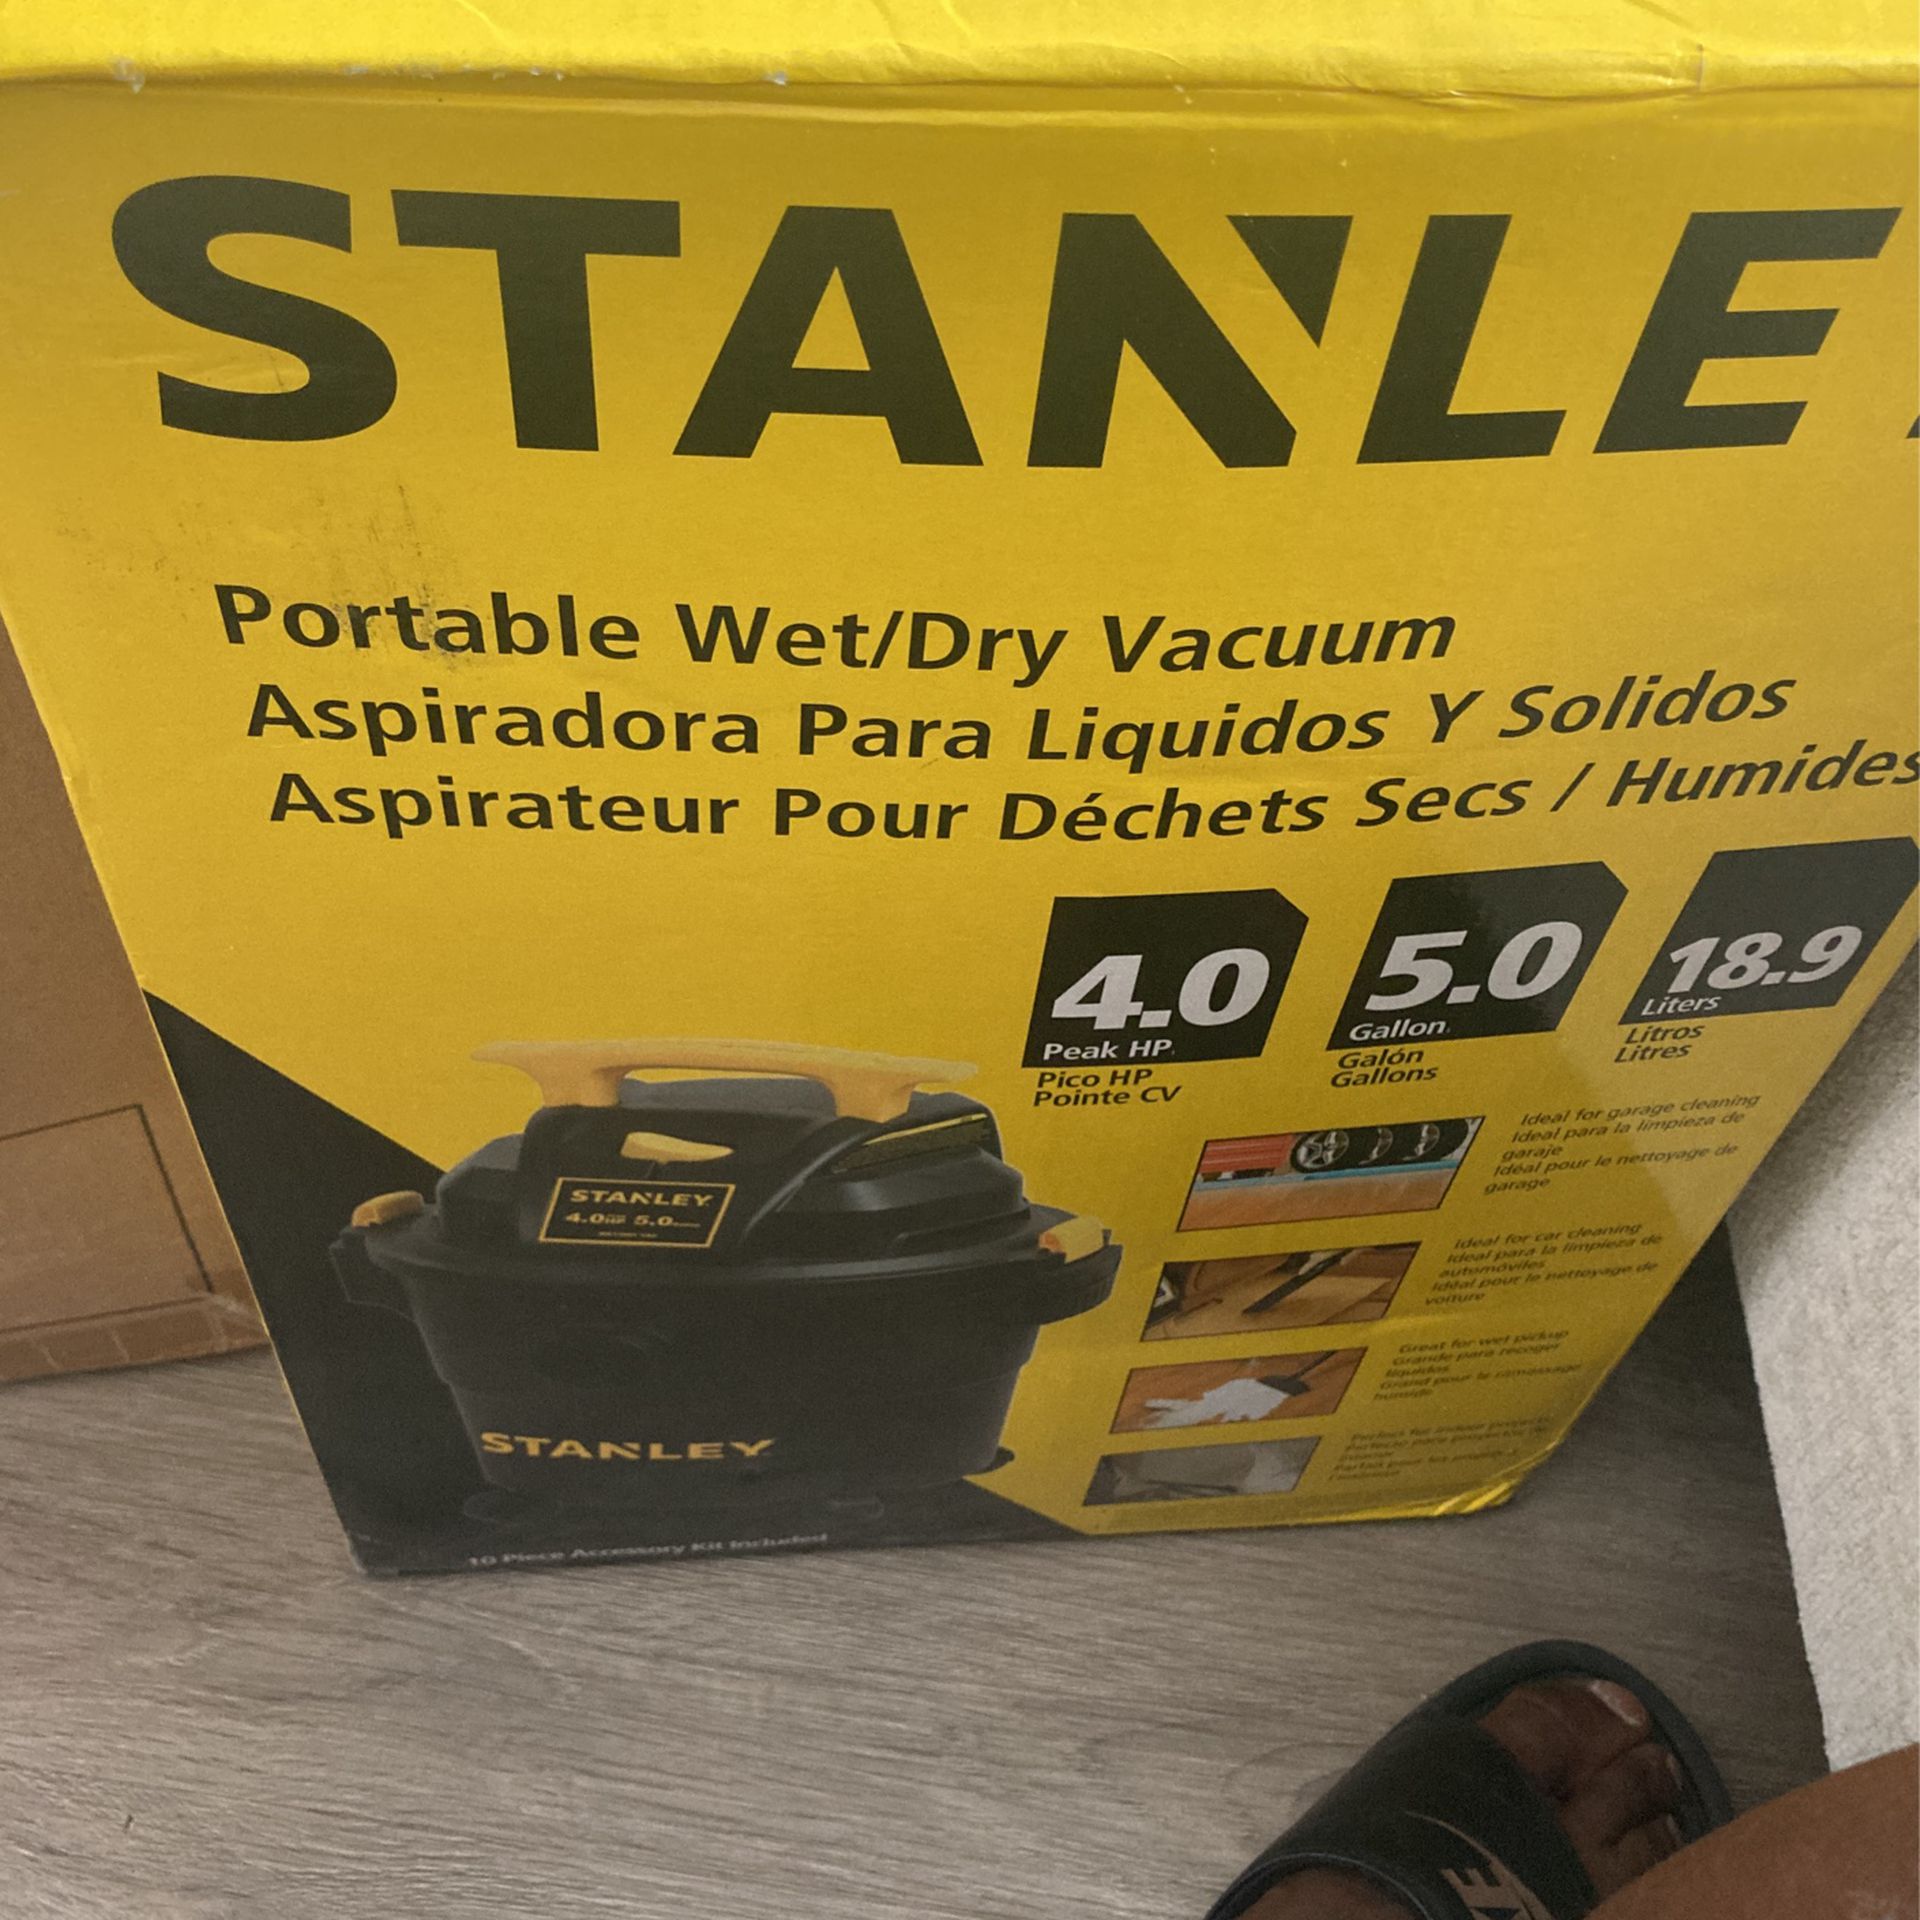 Stanley Portable Wet Dry Vac & Pressure Washer 